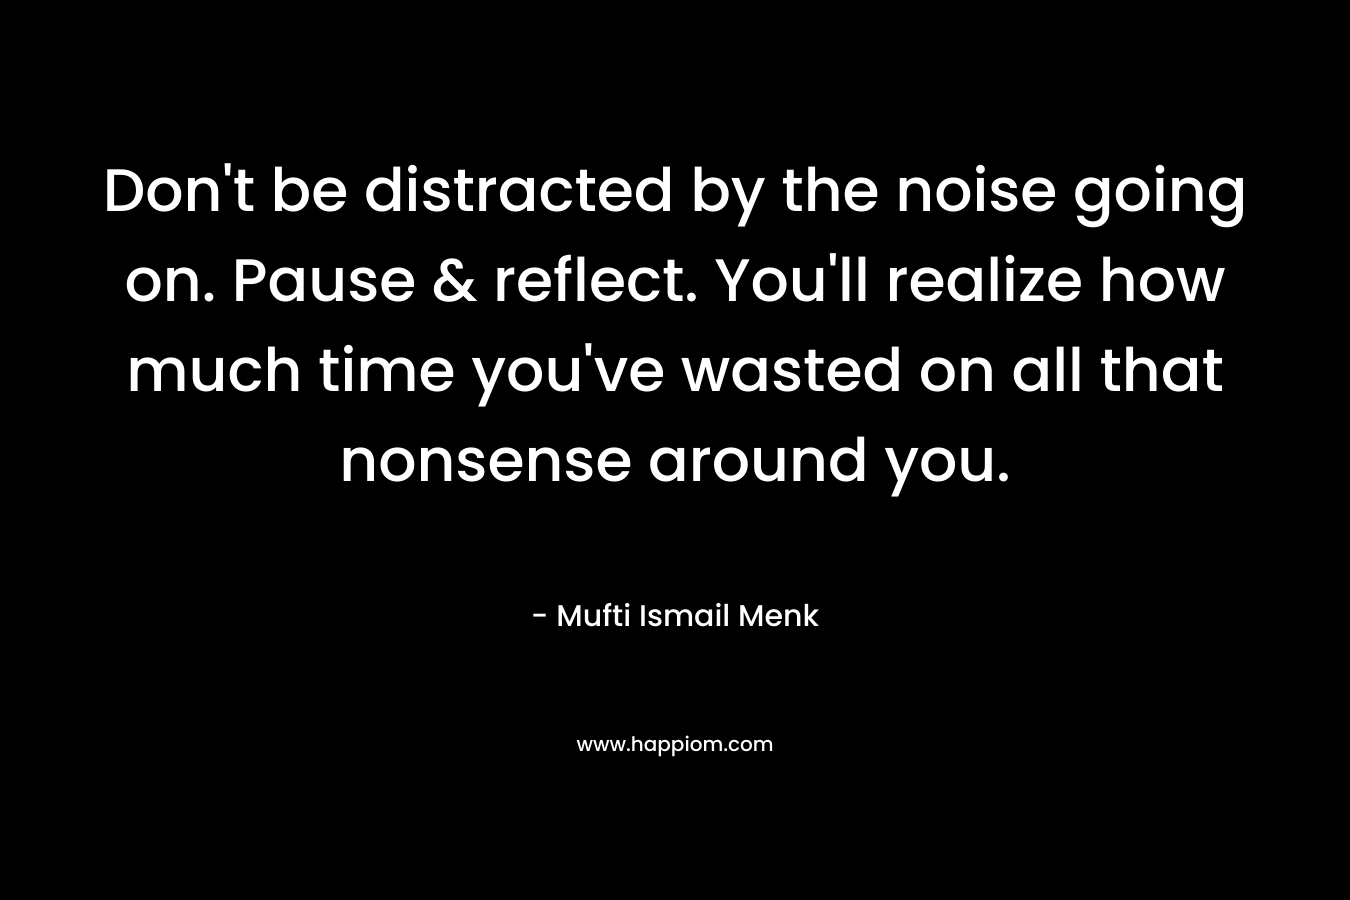 Don't be distracted by the noise going on. Pause & reflect. You'll realize how much time you've wasted on all that nonsense around you.